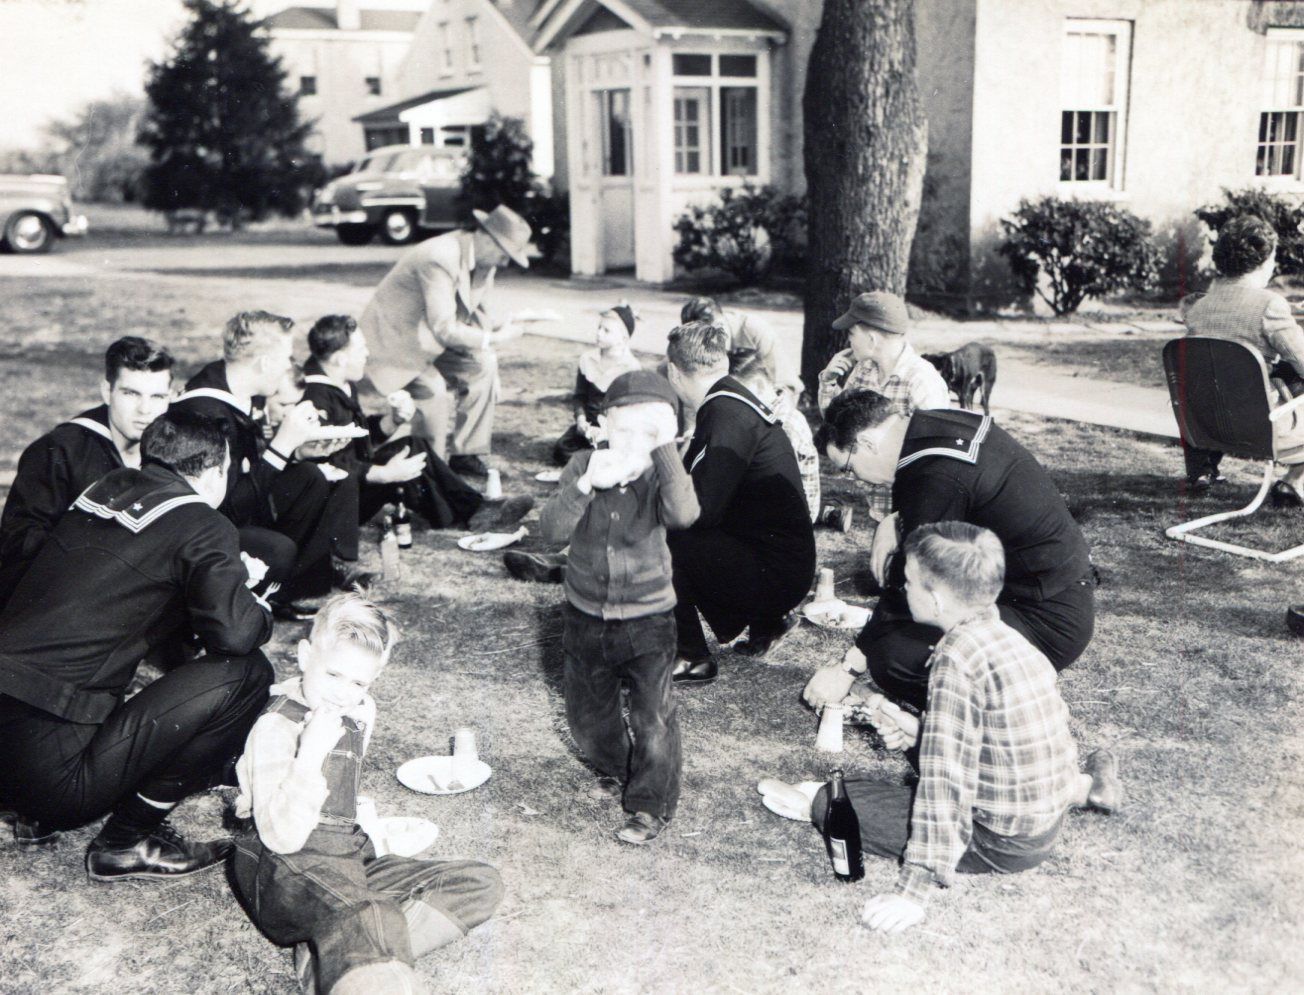 Virginia Home for Boys - old image from 1950s
